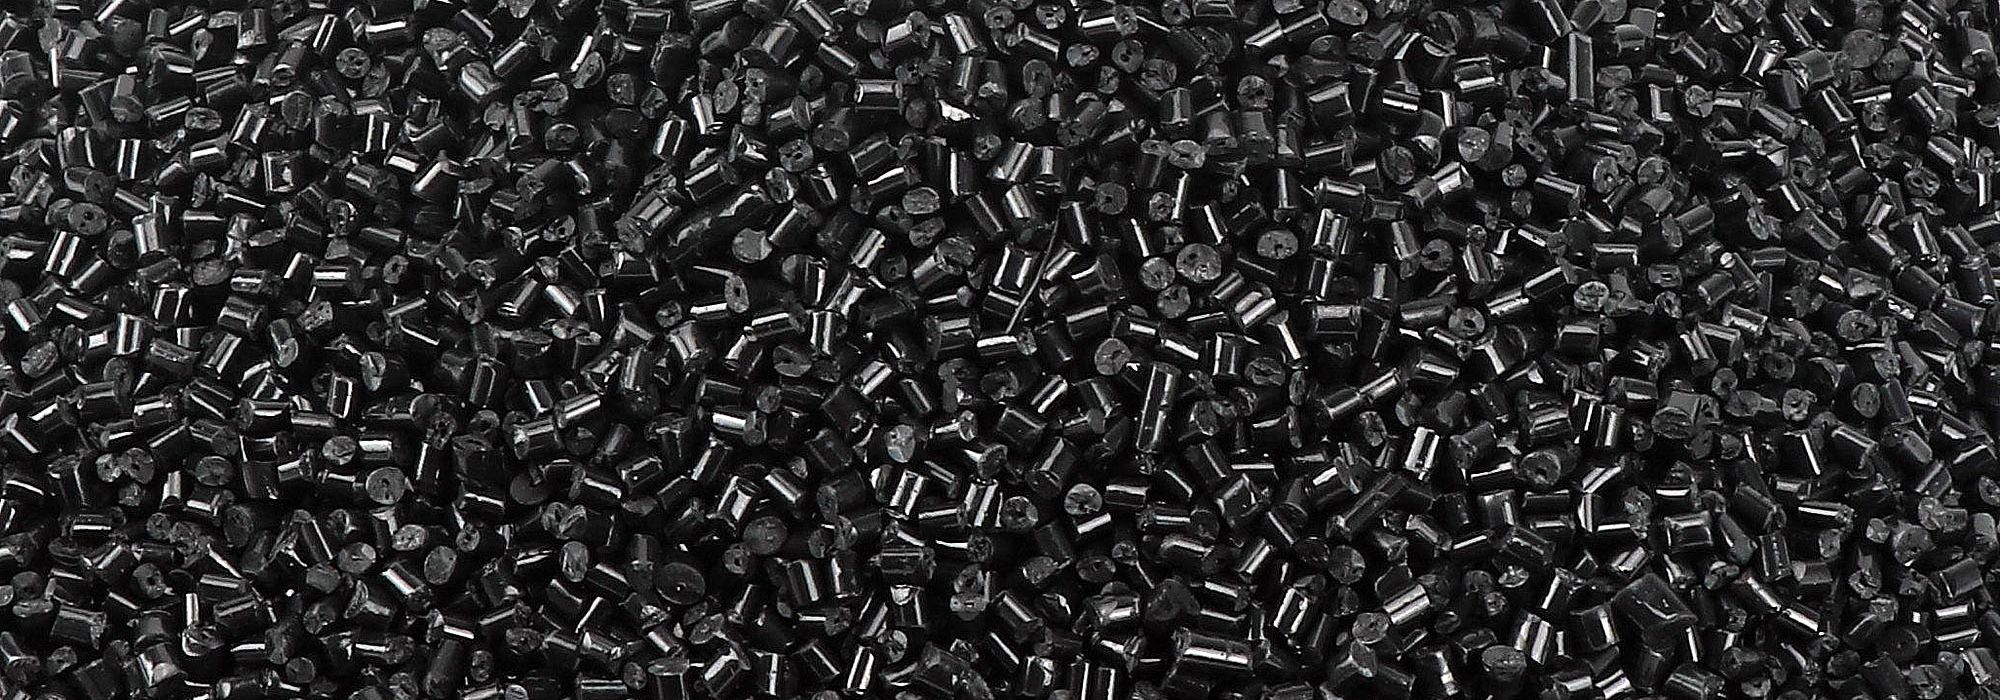 Plastic Recyclate Pellets - Post Consumer Recycling r-ABS - Acrylonitrile Butadiene Styrene